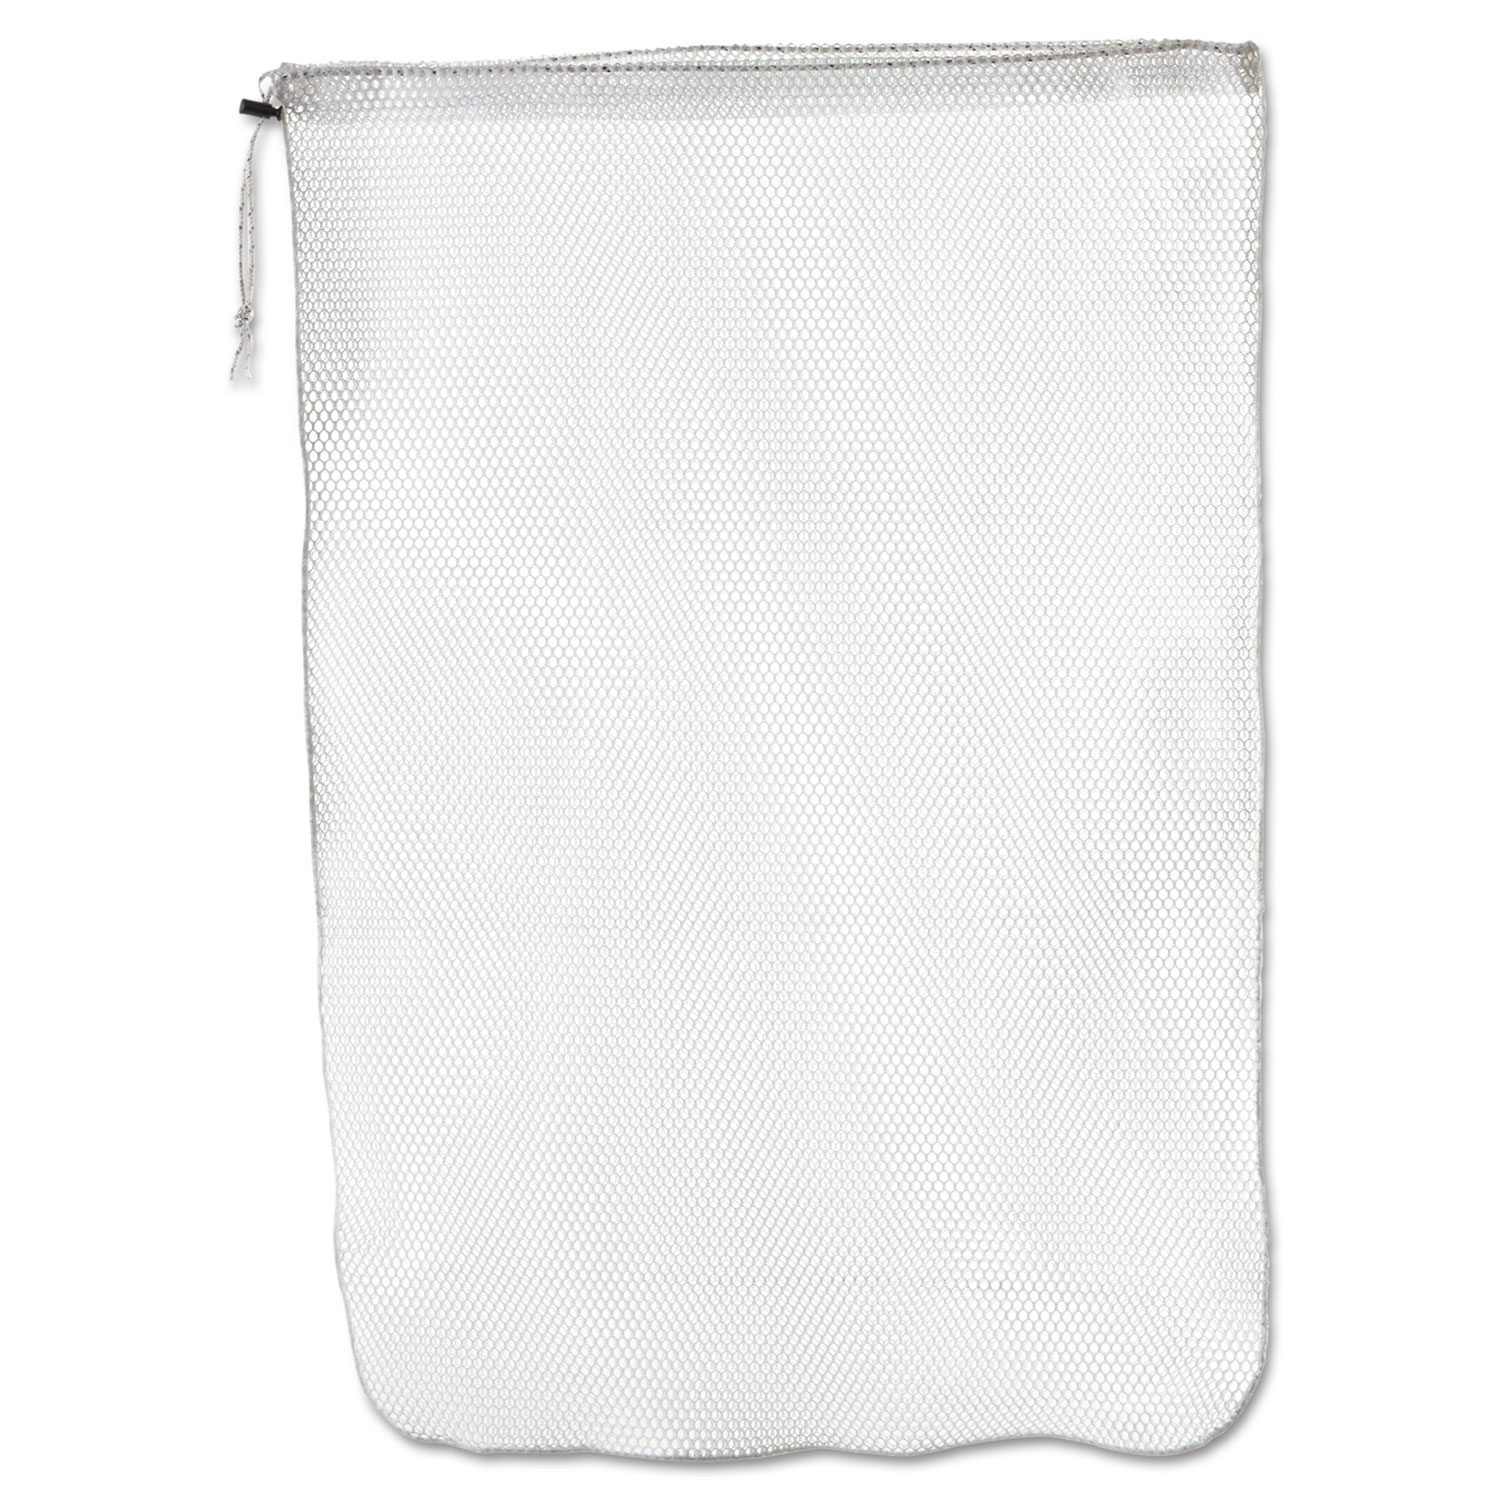 Laundry Net, 24w x 24d x 36h, Synthetic Fabric, White